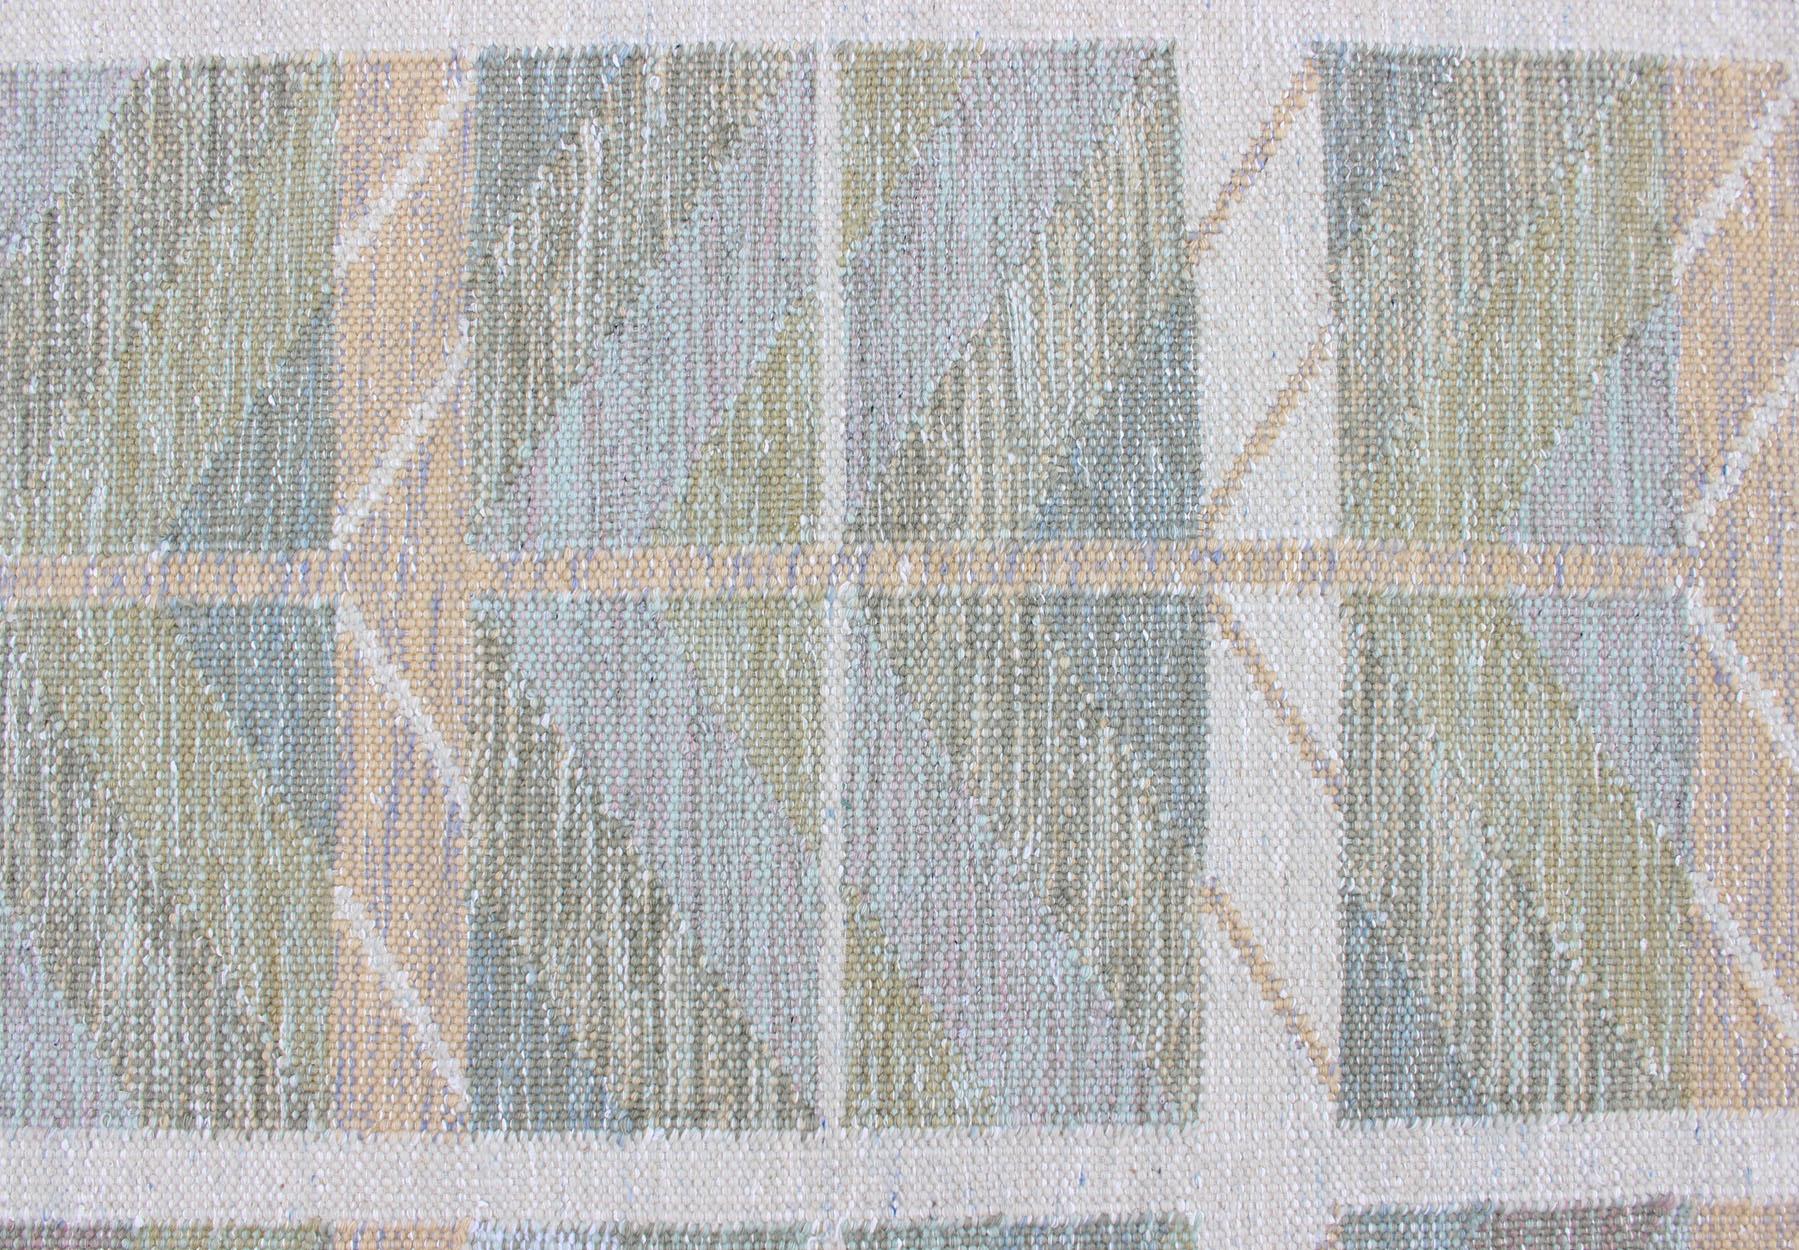 Keivan Woven Arts Scandinavian Flat-Weave Design Rug with Green, Gray, and Peach. Keivan Woven Arts / rug RJK-24598, country of origin / type: India / Scandinavian flat-weave.
Measures: 9'1 x 12'0 
This Scandinavian flat-weave is inspired by the